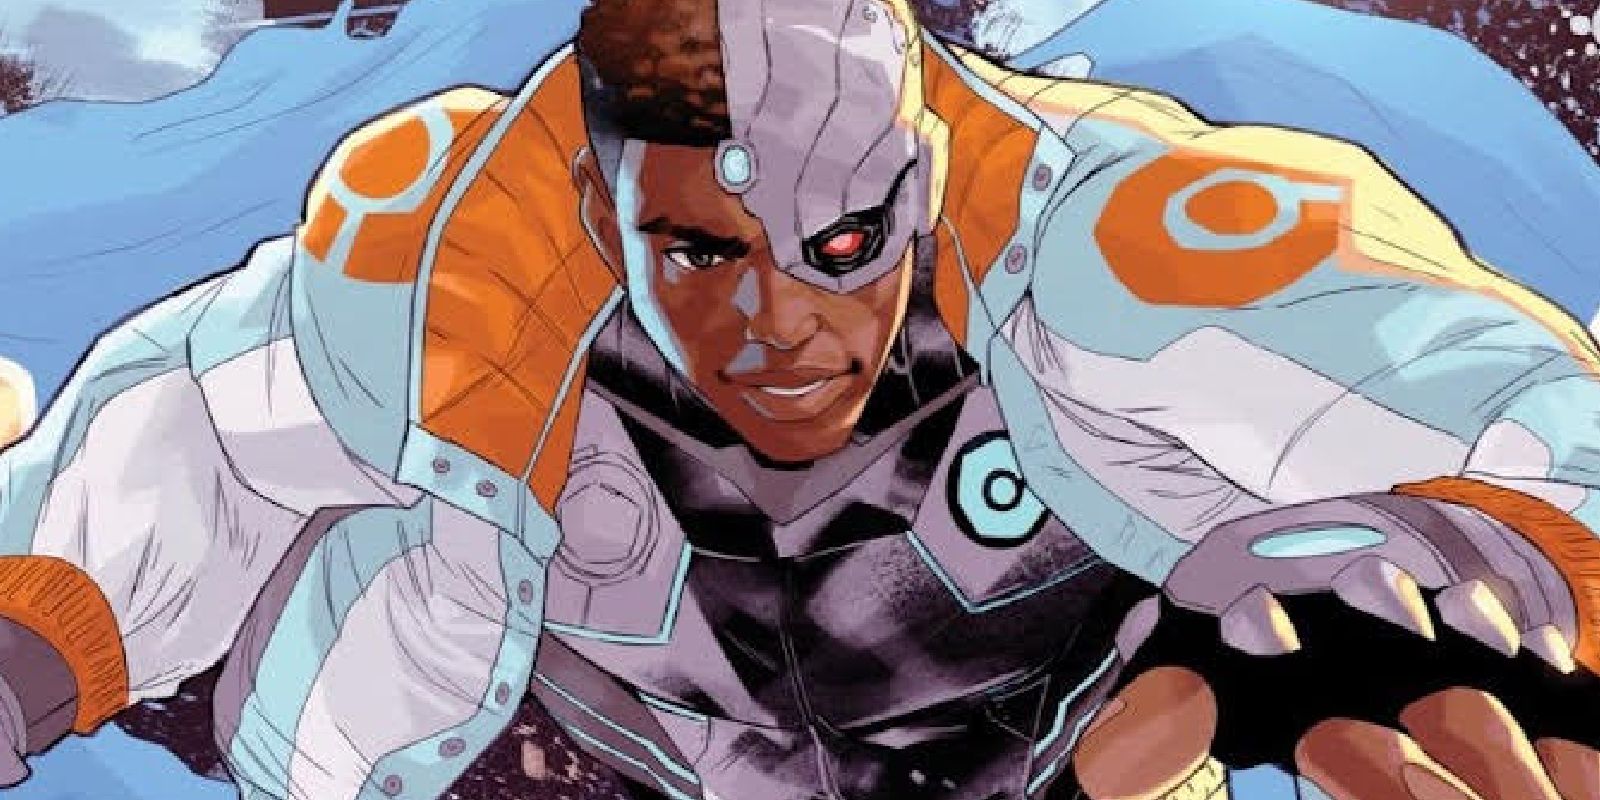 Cyborg smiling while readying for battle in DC Comics